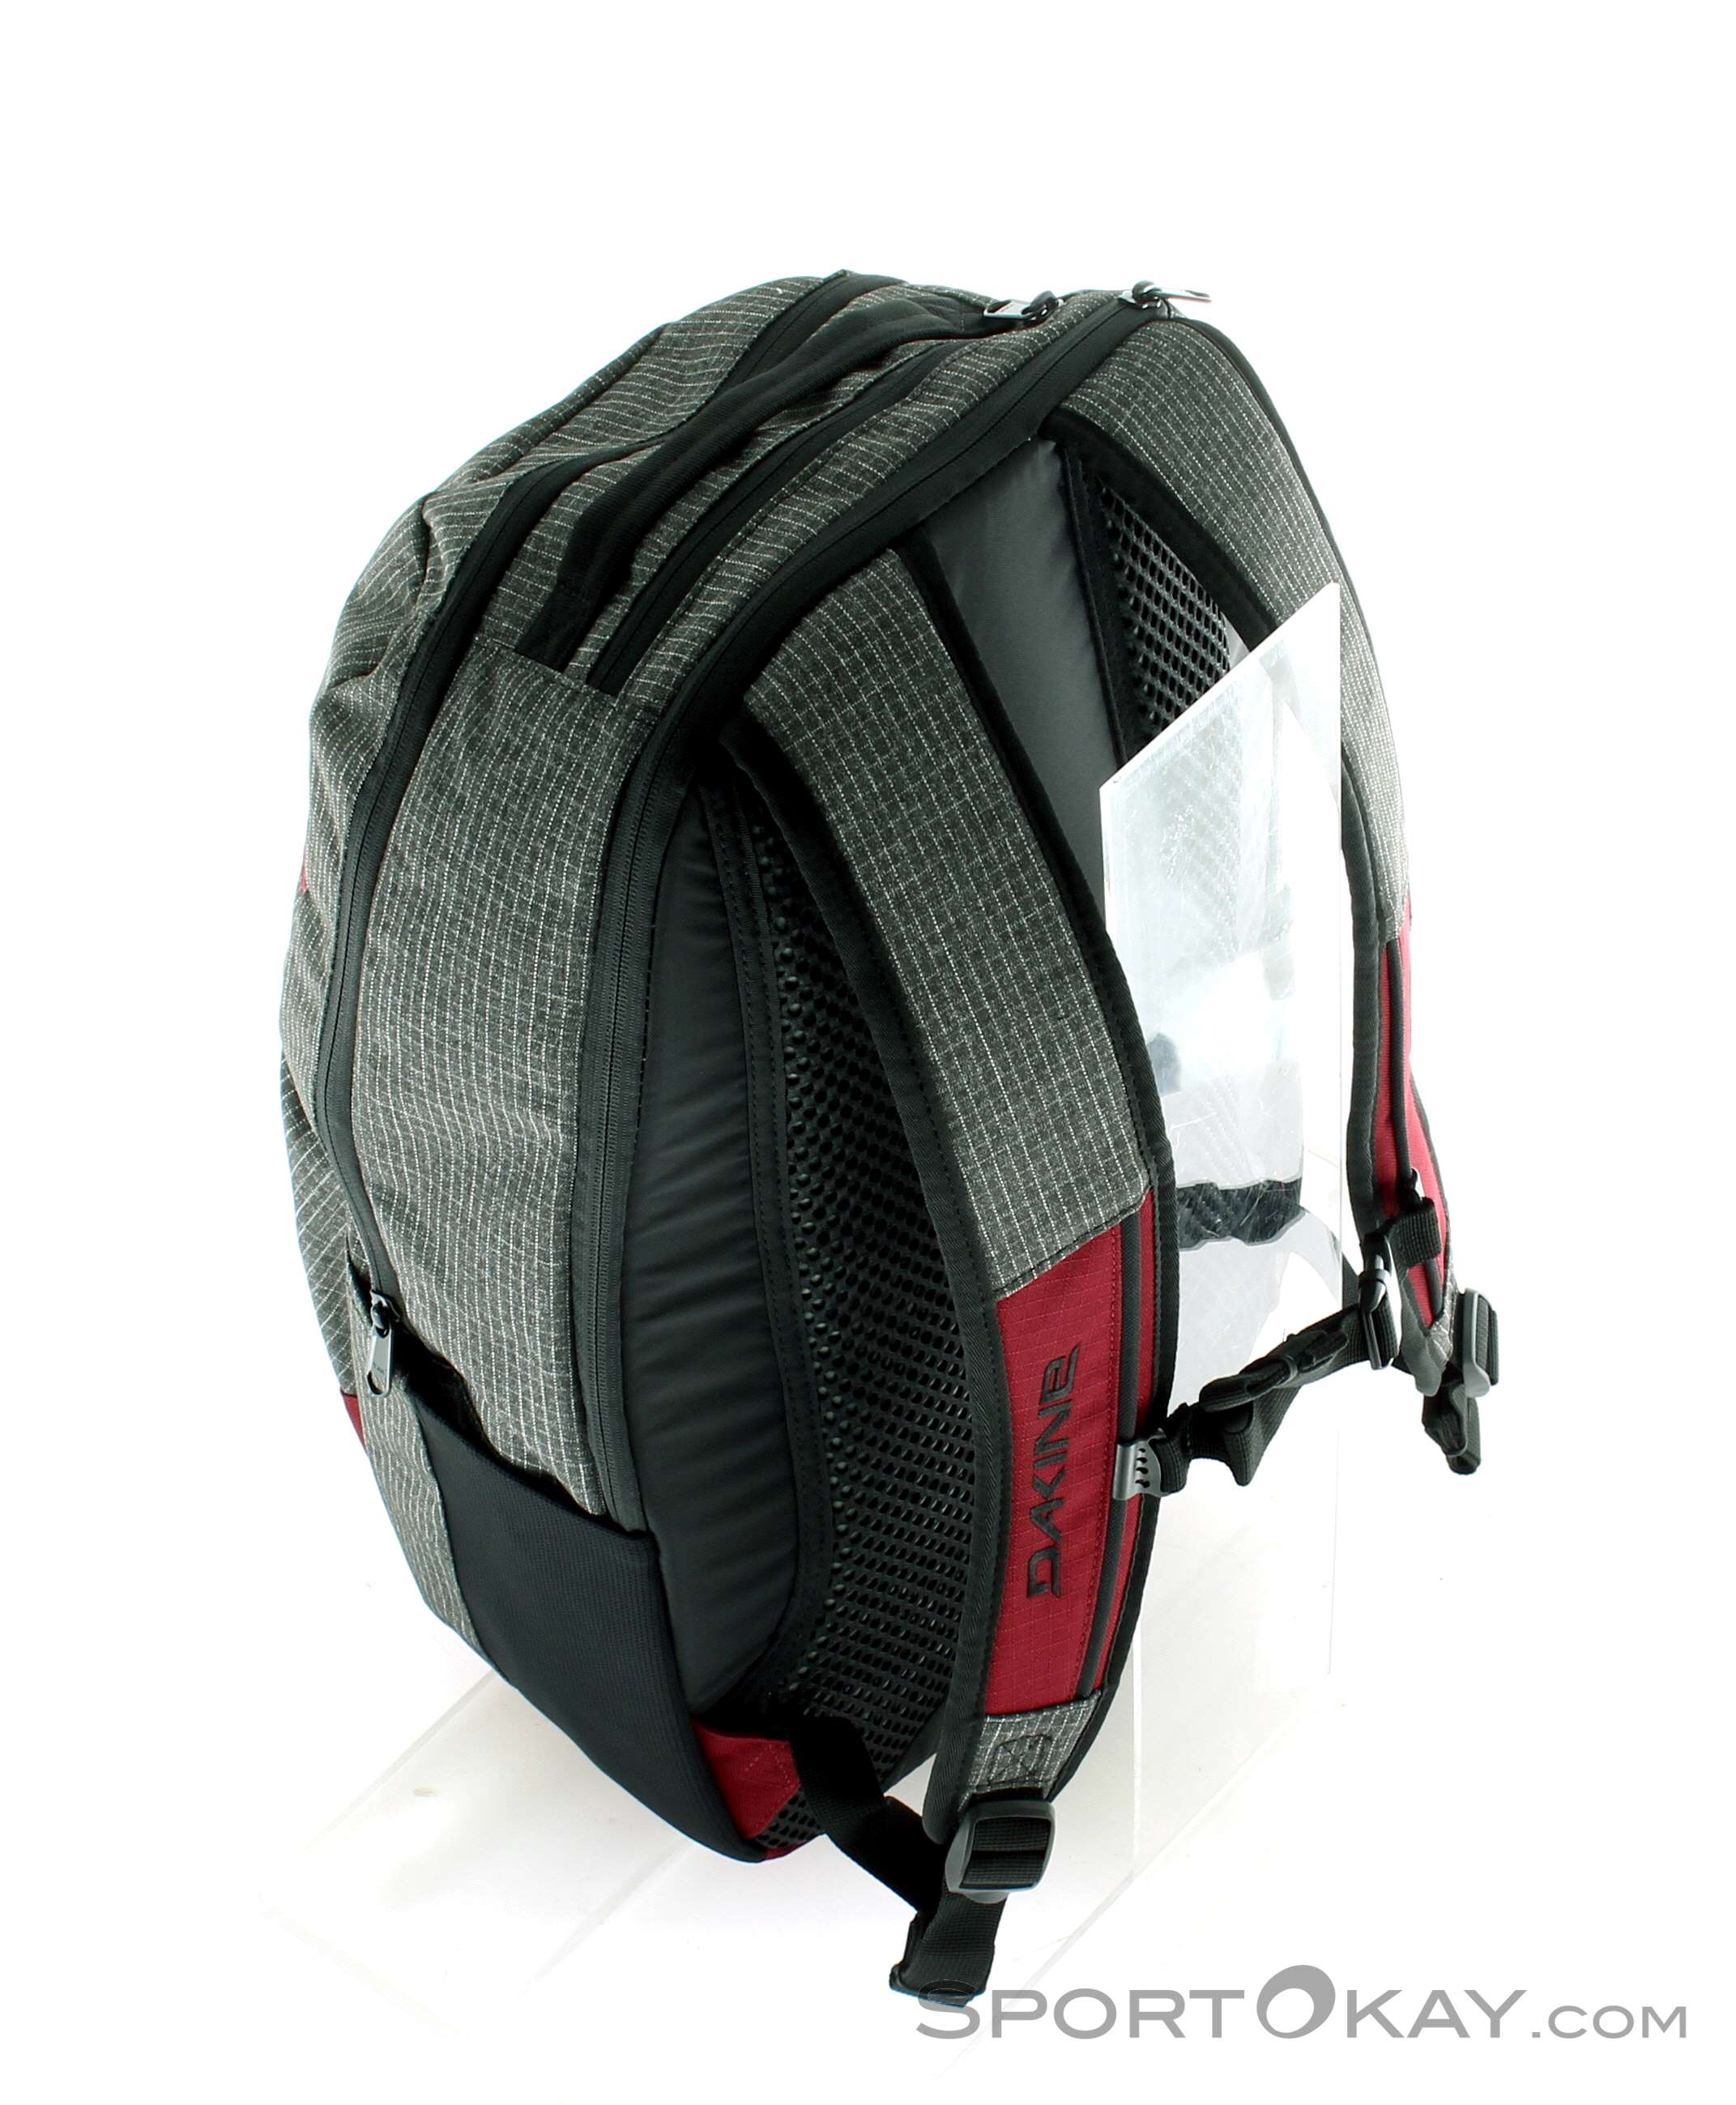 Dakine Campus DLX 33l Backpack Bags Leisure Bags Fashion All